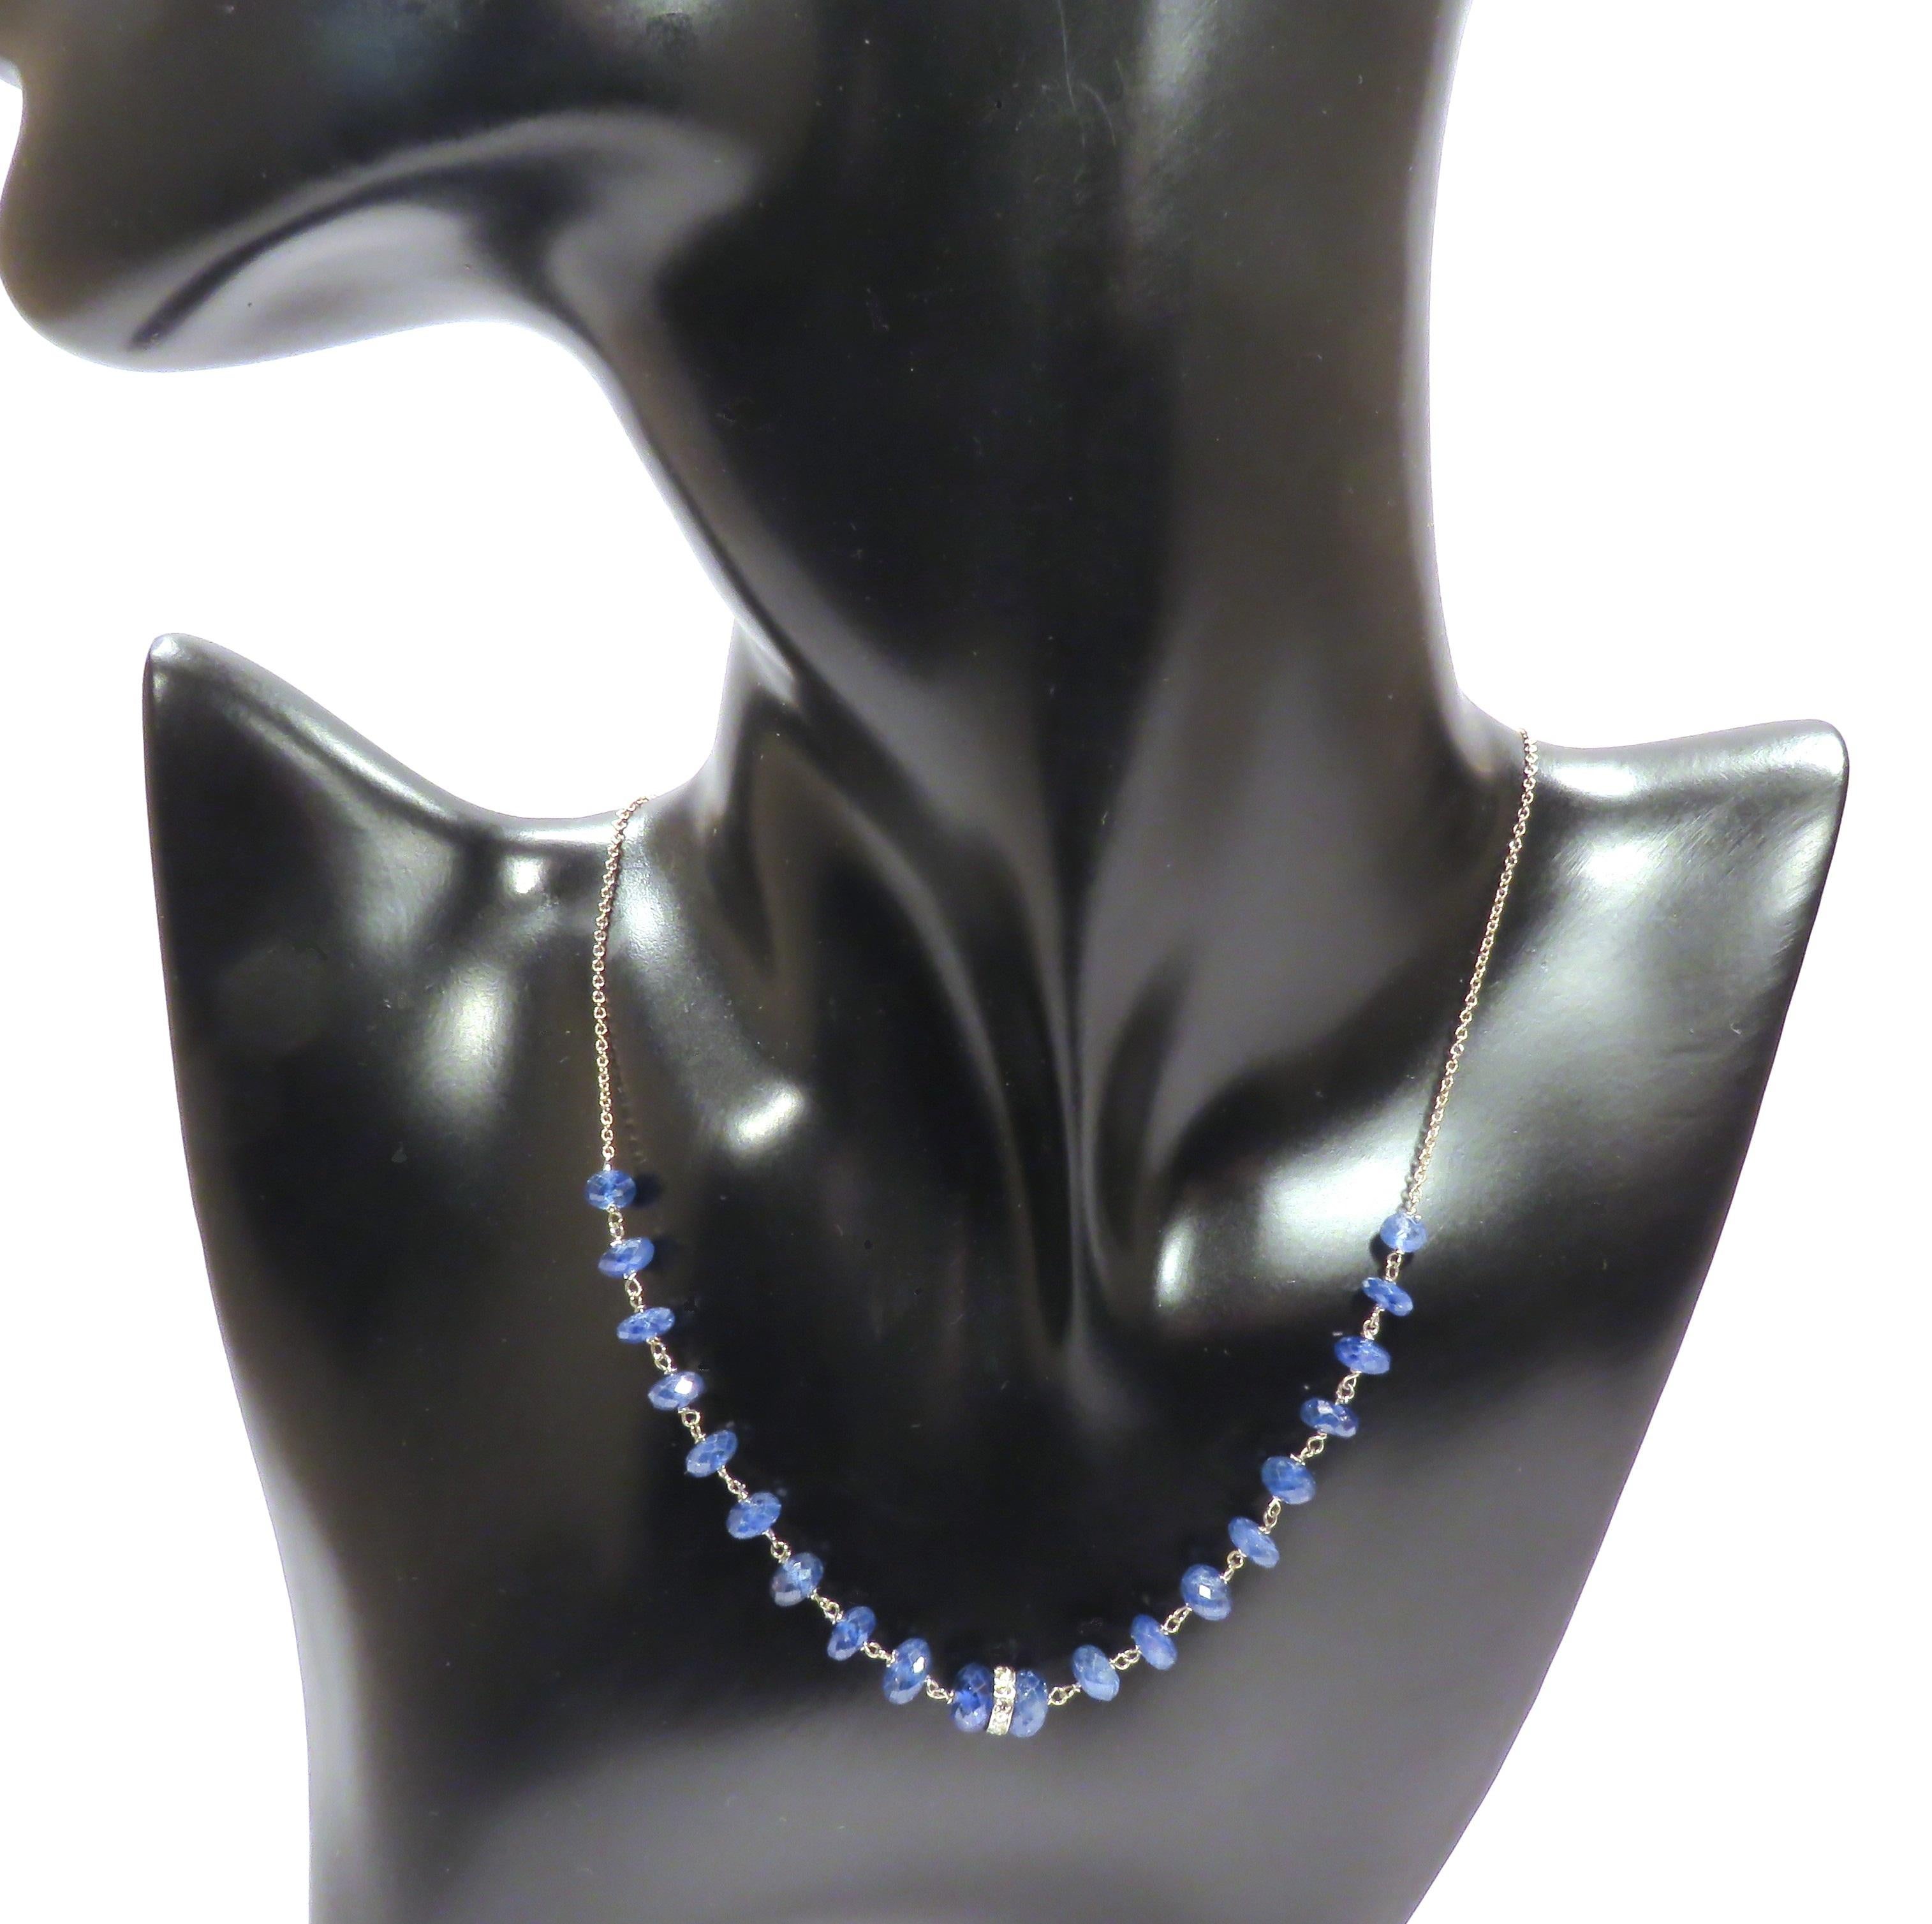 Contemporary Diamonds Blue Sapphires 9 Karat White Gold Choker Necklace Handcrafted in Italy